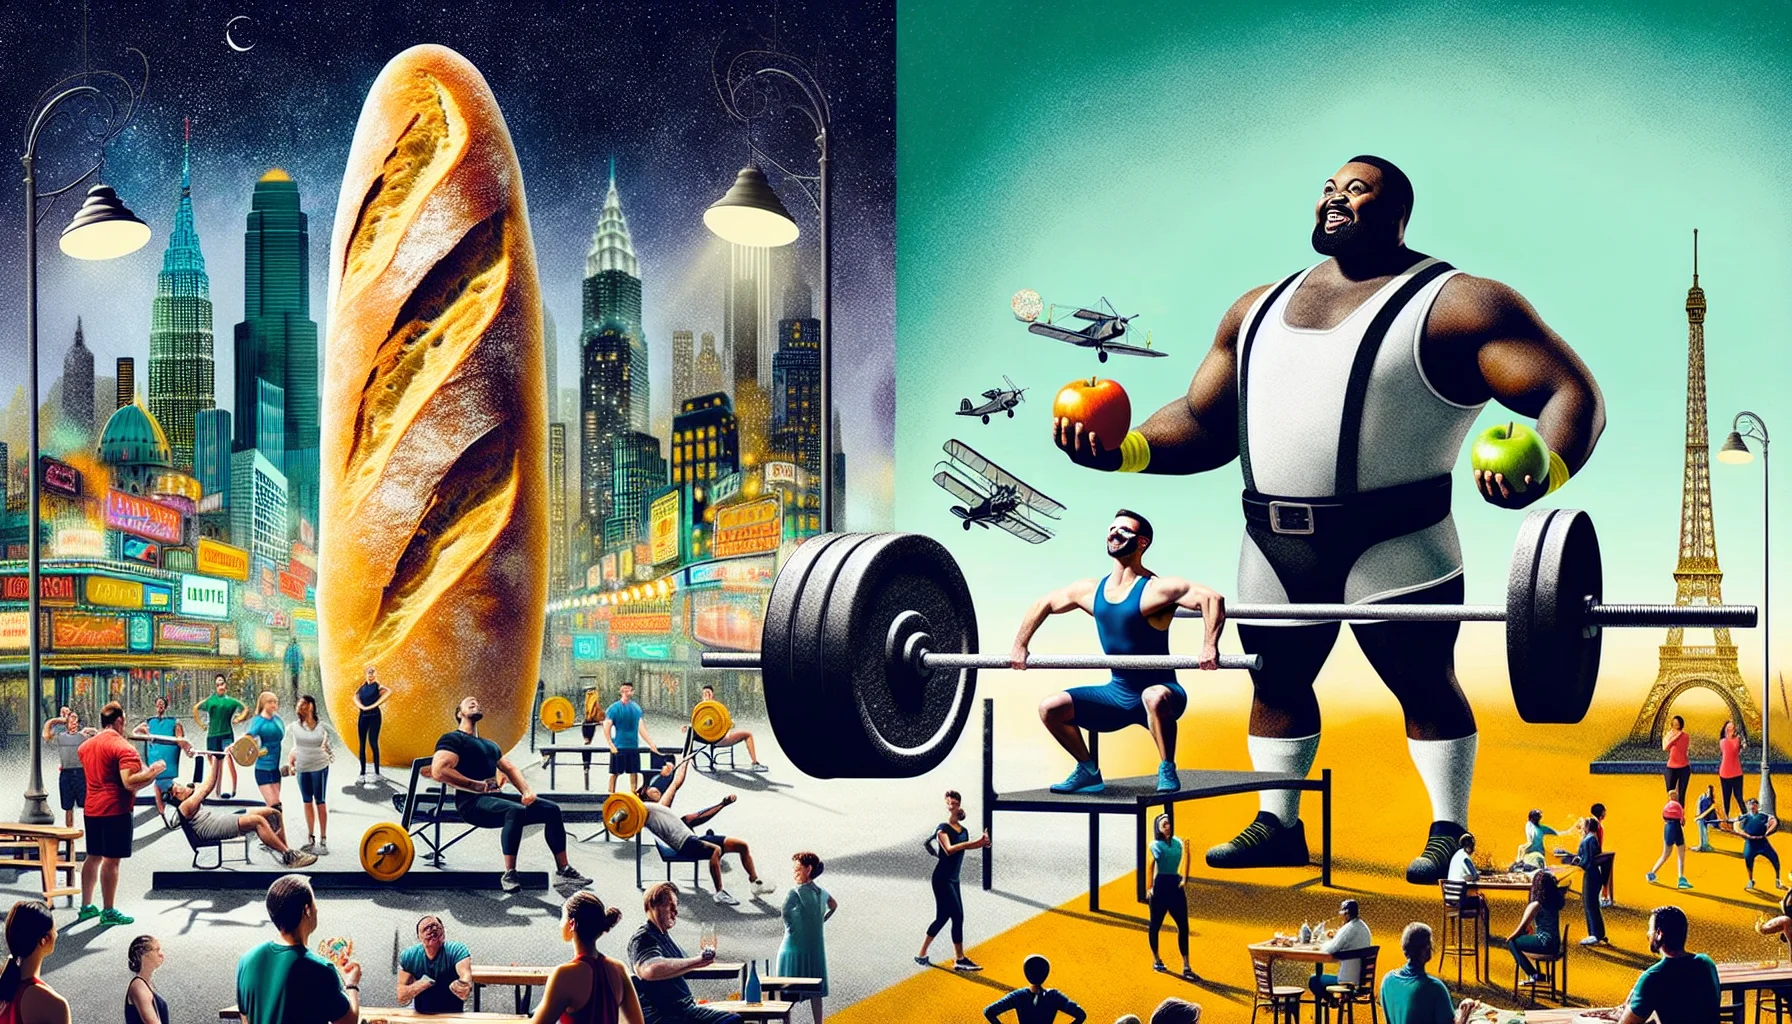 Imagine a humorous scene that highlights the competition between powerlifting and strongman events. In one corner, a muscular Caucasian woman is confidently performing a bench press with an oversized barbell that lightheartedly resembles a massive baguette. In the opposite corner, a brawny Black man is effortlessly lifting a colossal dumbbell shaped like a giant apple, a playful take on the strongman deadlift. The background is a bustling gym filled with other multi-ethnic individuals engaged in various forms of exercises, illustrating an inclusive atmosphere encouraging everyone to participate. This playful spin on exercise aims to promote fitness as a fun and diverse activity.